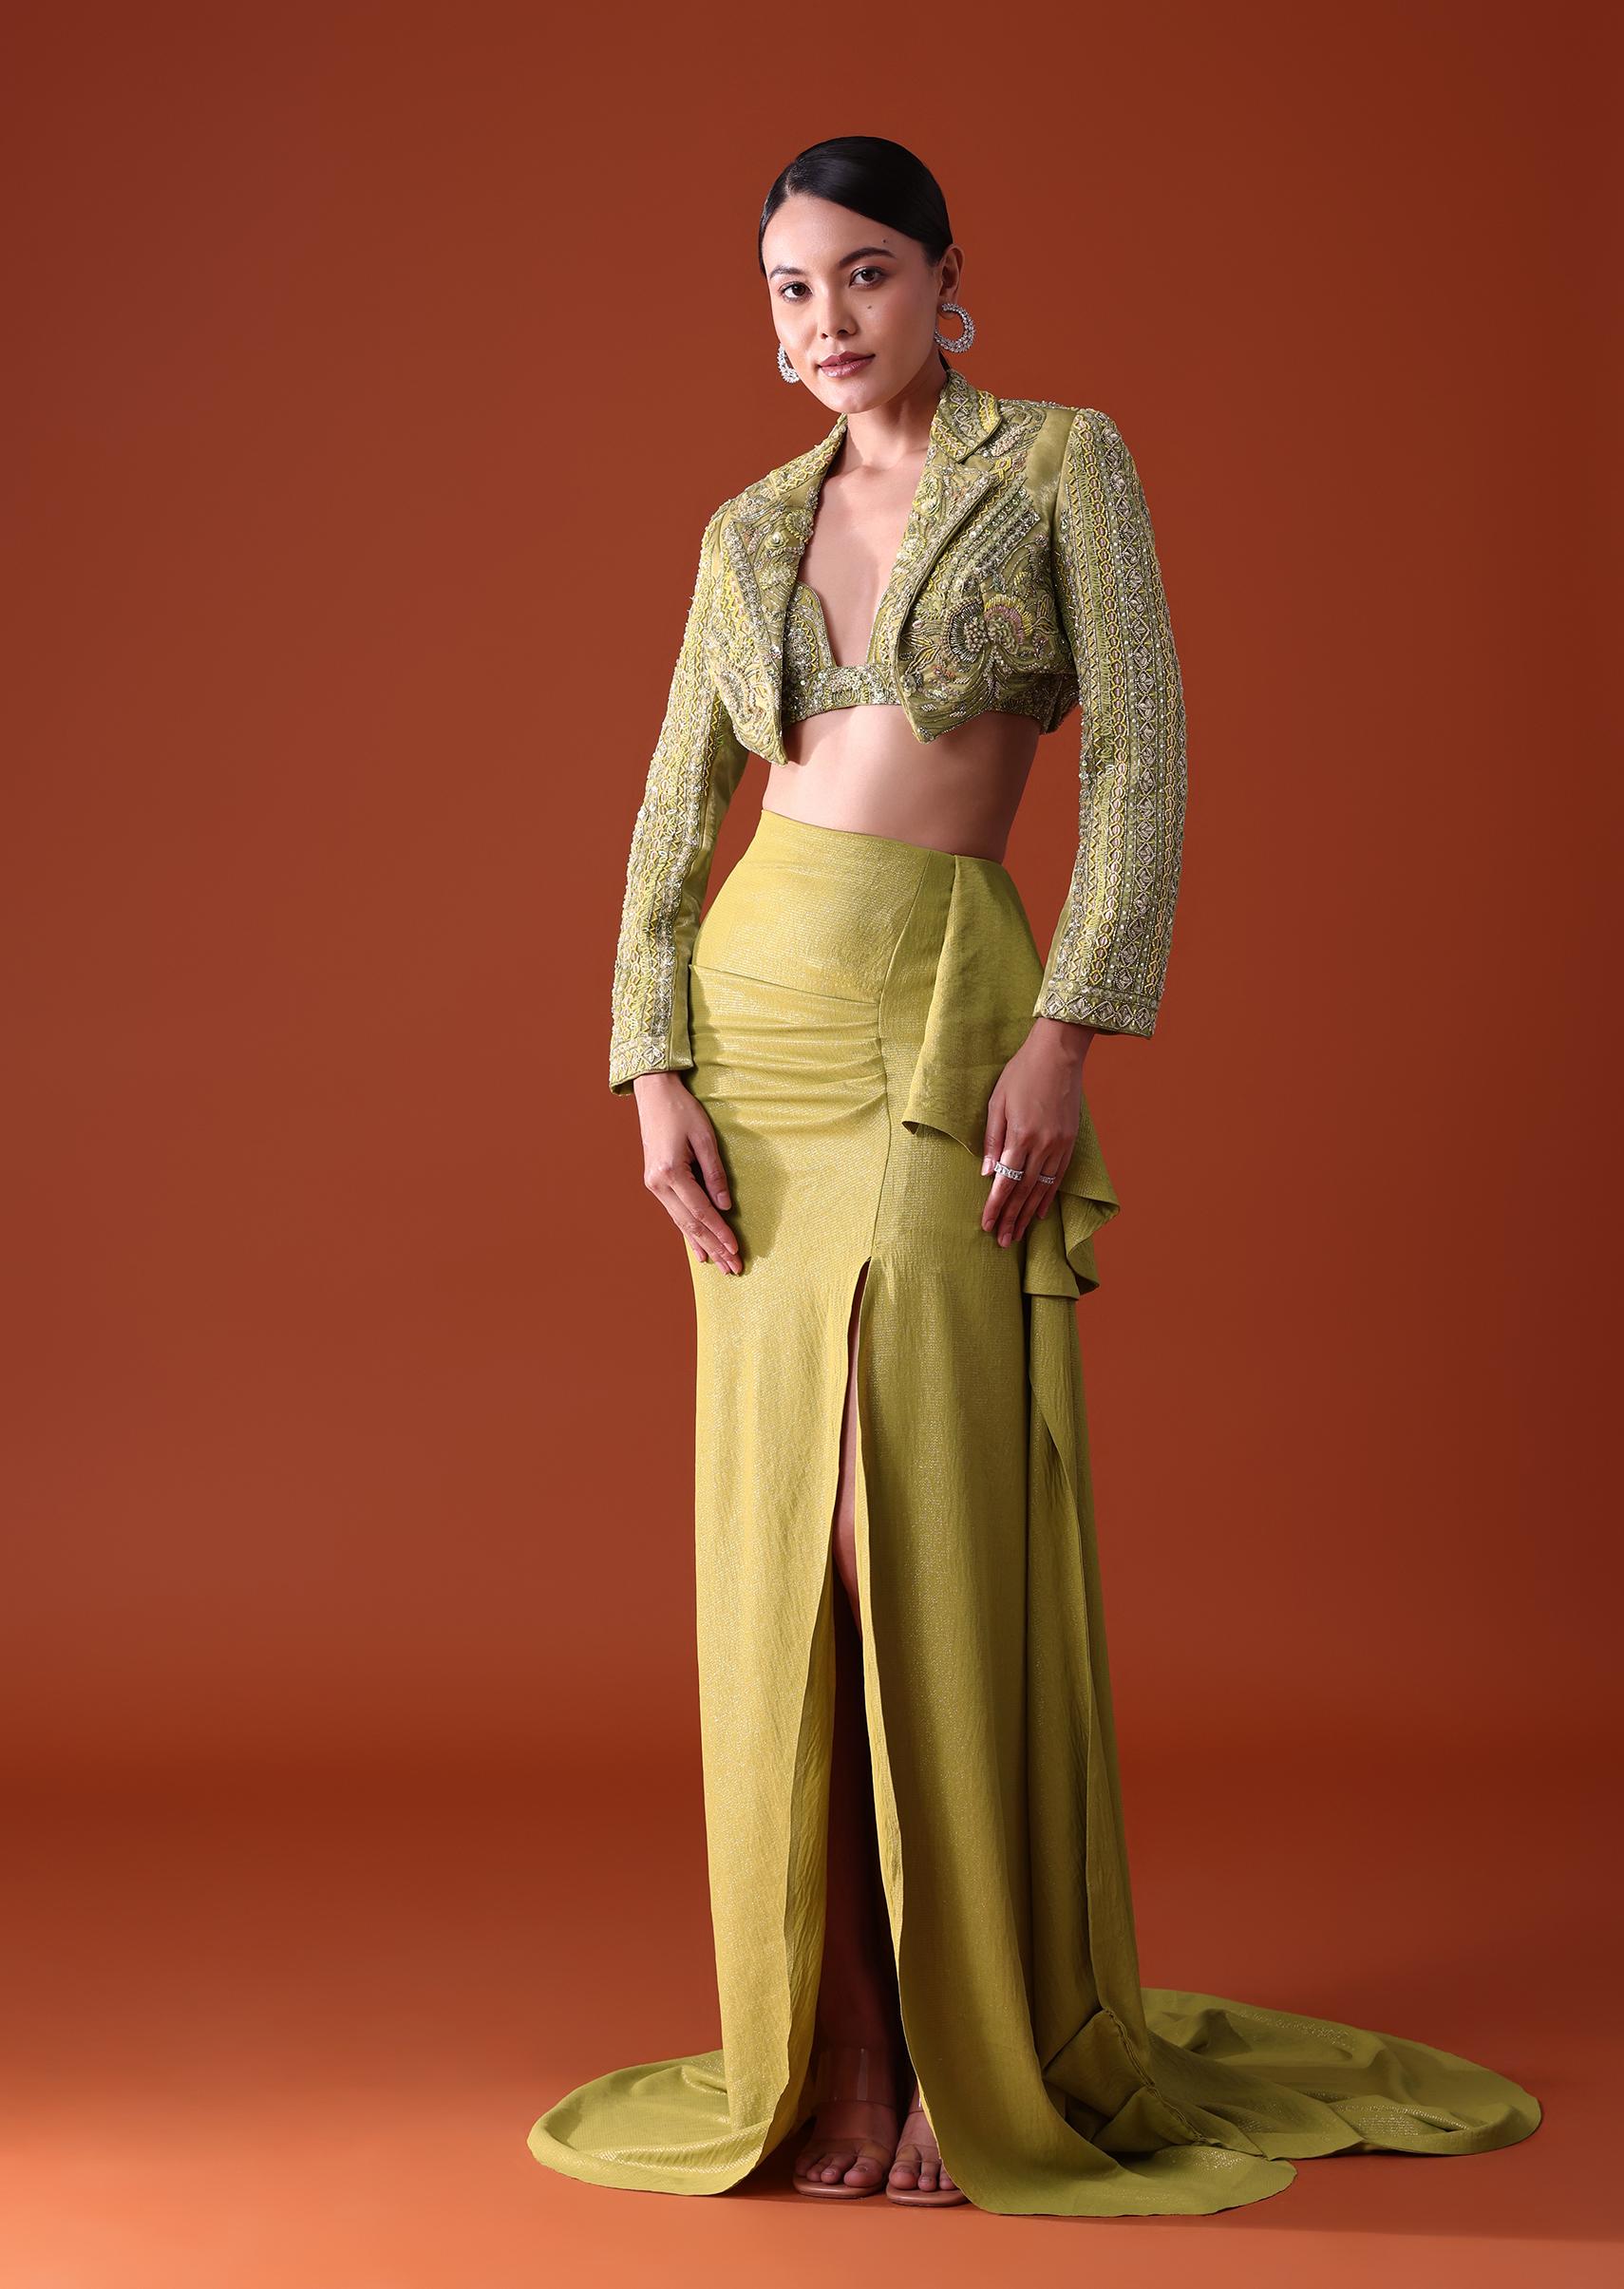 Citrus Green Draped Slit Skirt With Embroidered Short Jacket